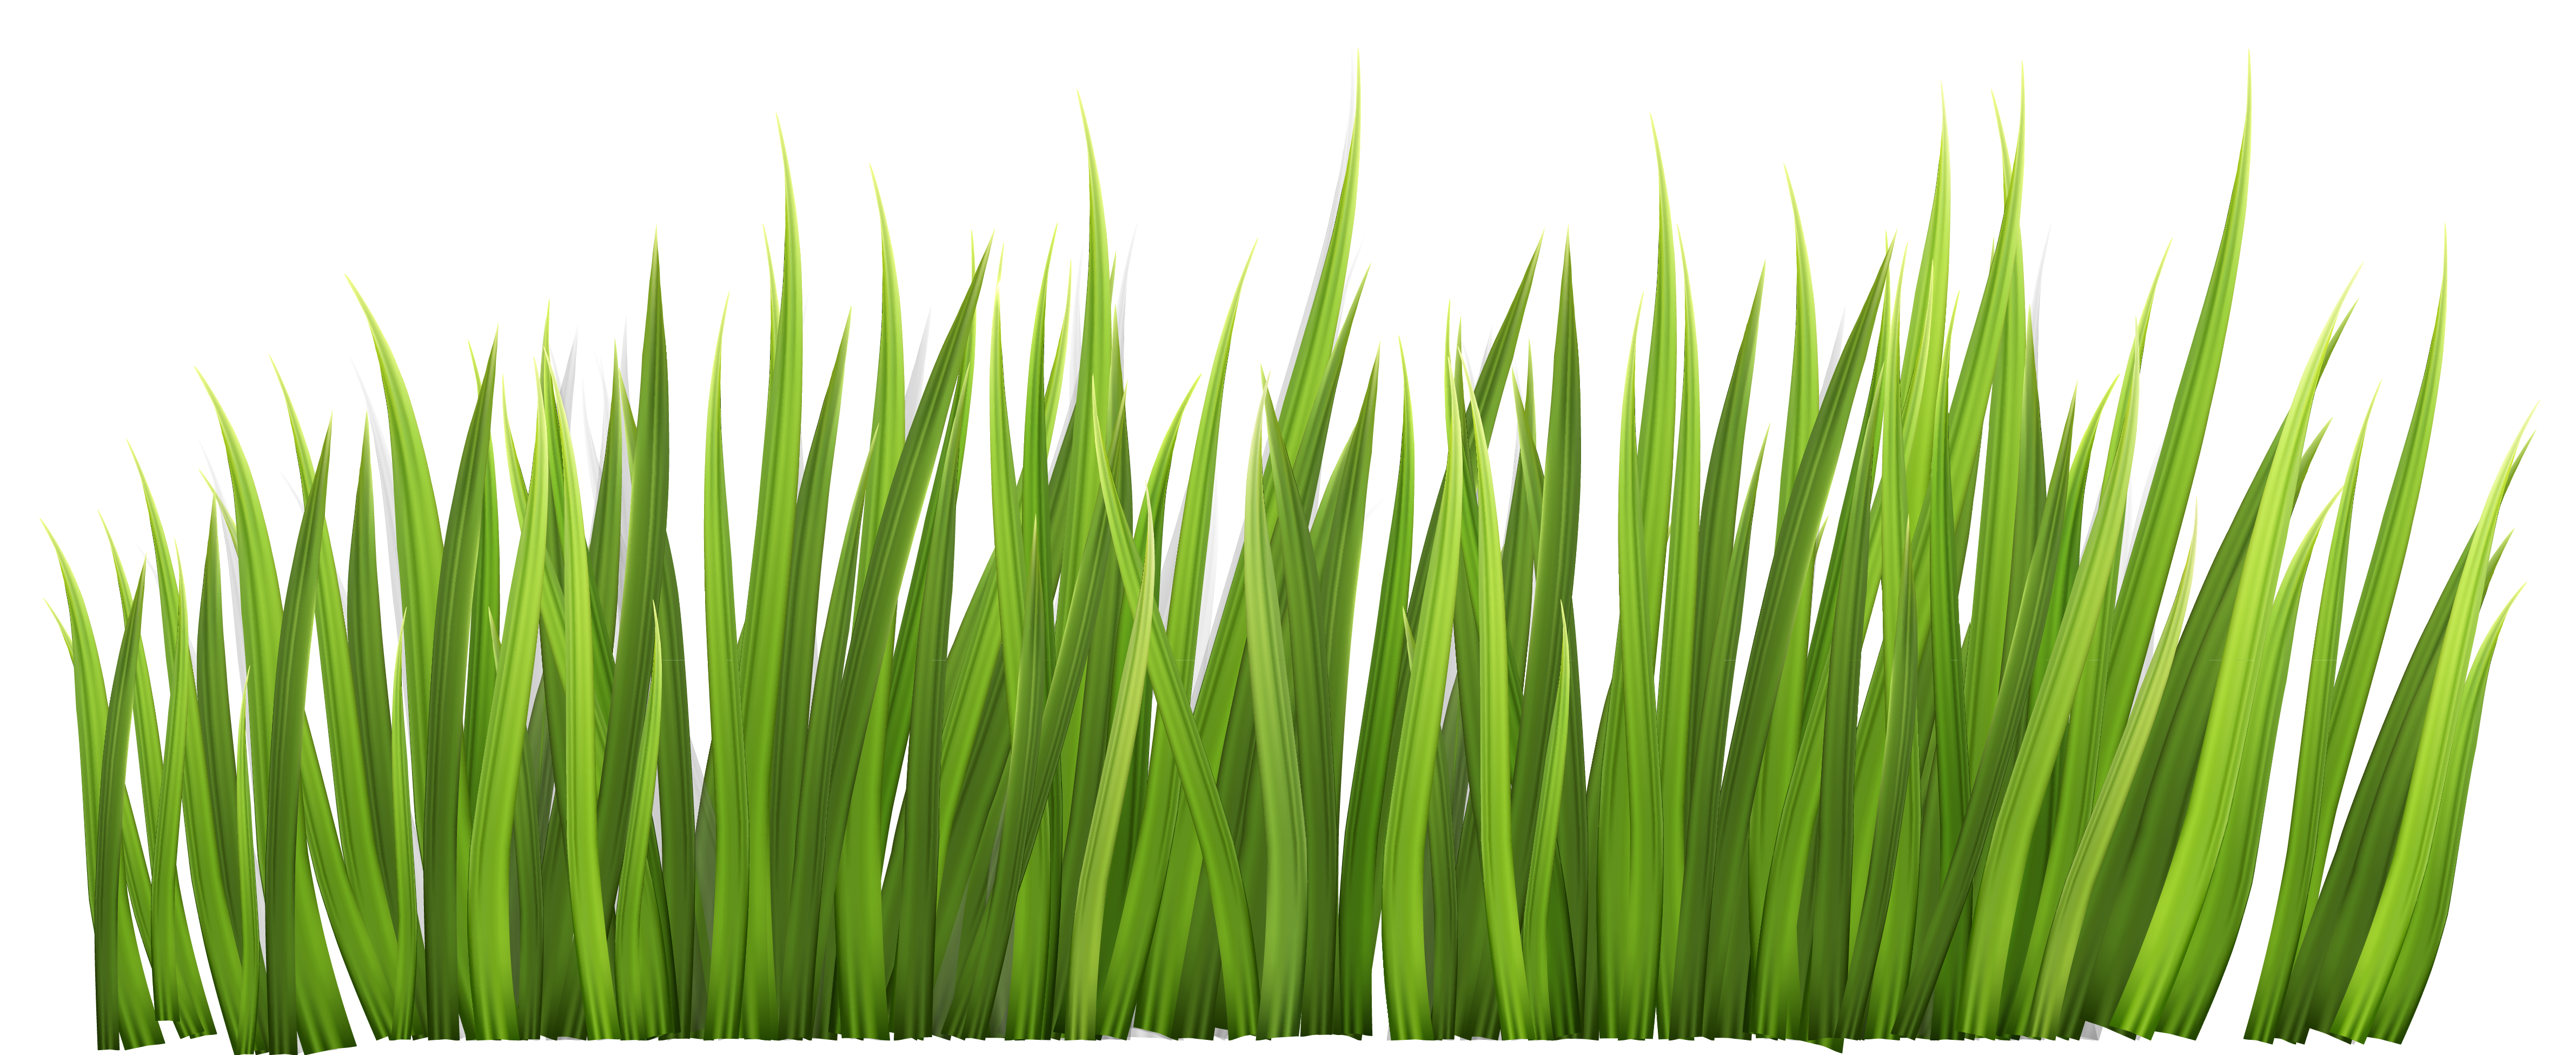 Grass clip art free free clipart images 2